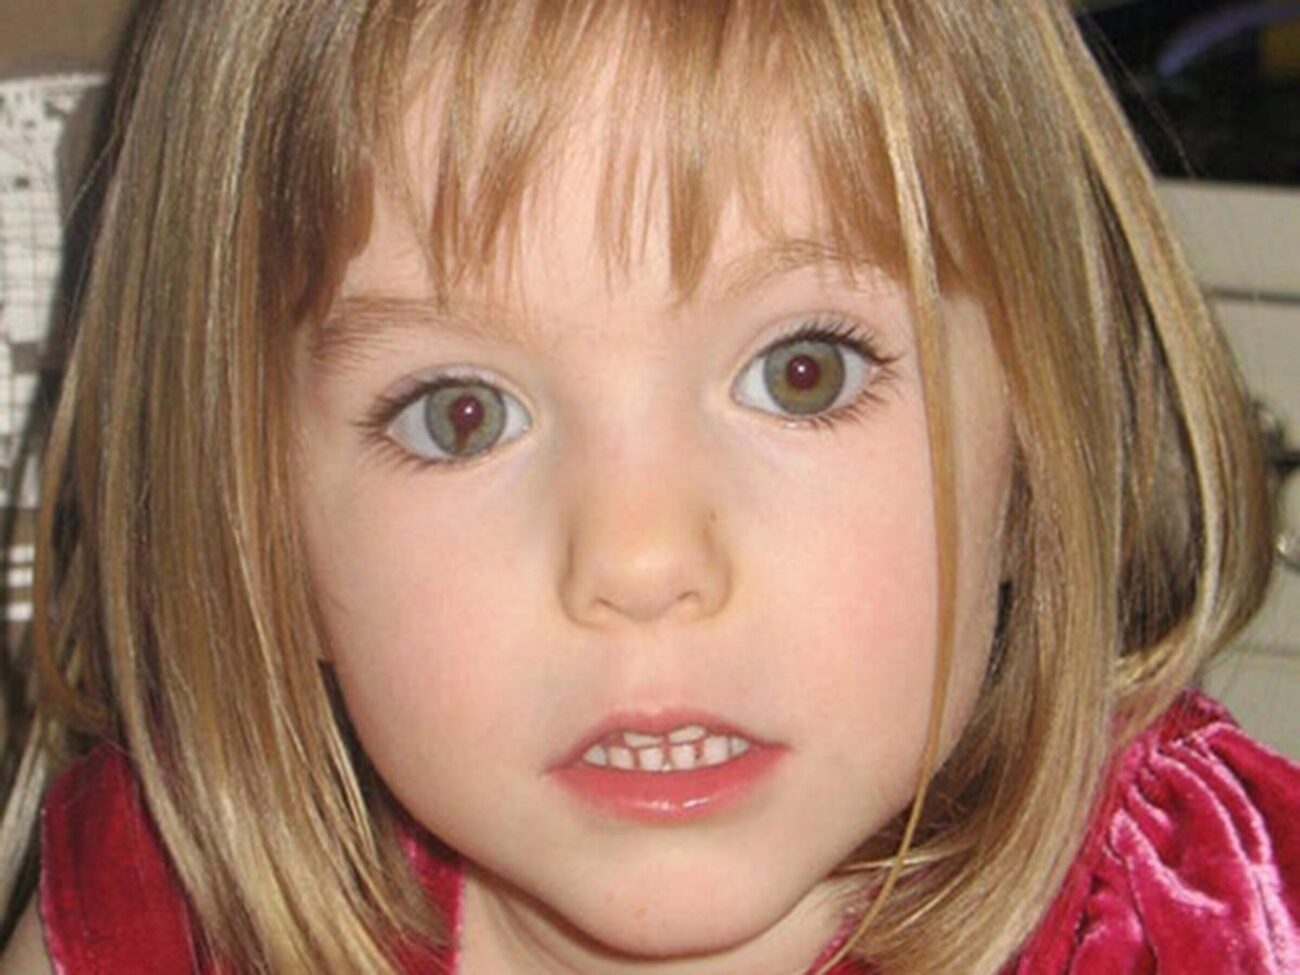 Over a decade later, Madeleine McCann's disappearance still hasn't been solved. However, an ex-girlfriend of the prime suspect has revealed new details.